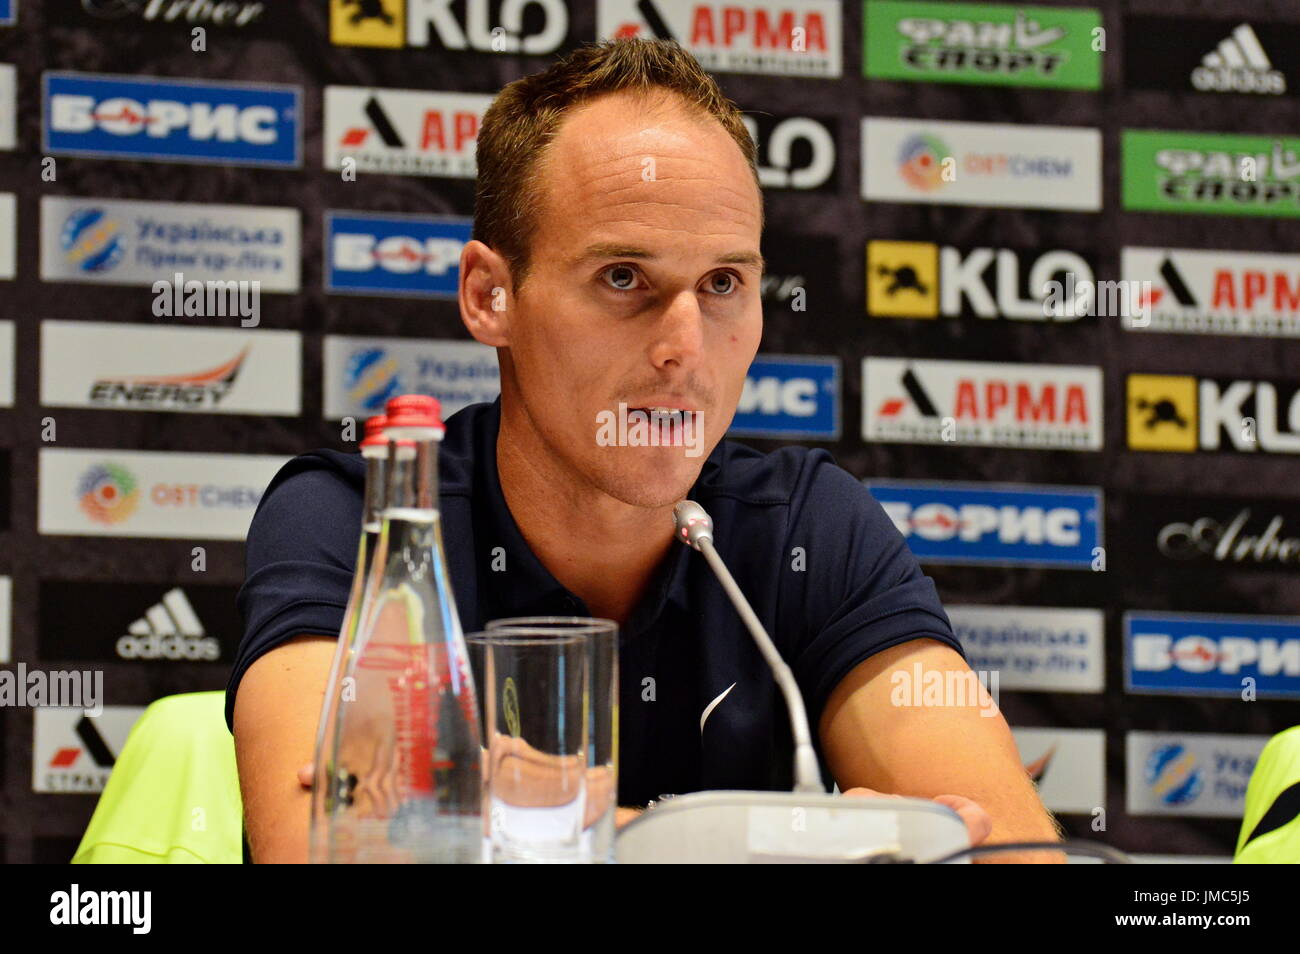 Kiev, Ukraine. 25th July, 2017. BSC Young Boys player Steve von Bergen at the press conference before the UEFA Champions League match between Dynamo Kiev vs BSC Young Boys (Swiss) Credit: Alexandr Gusev/Pacific Press/Alamy Live News Stock Photo